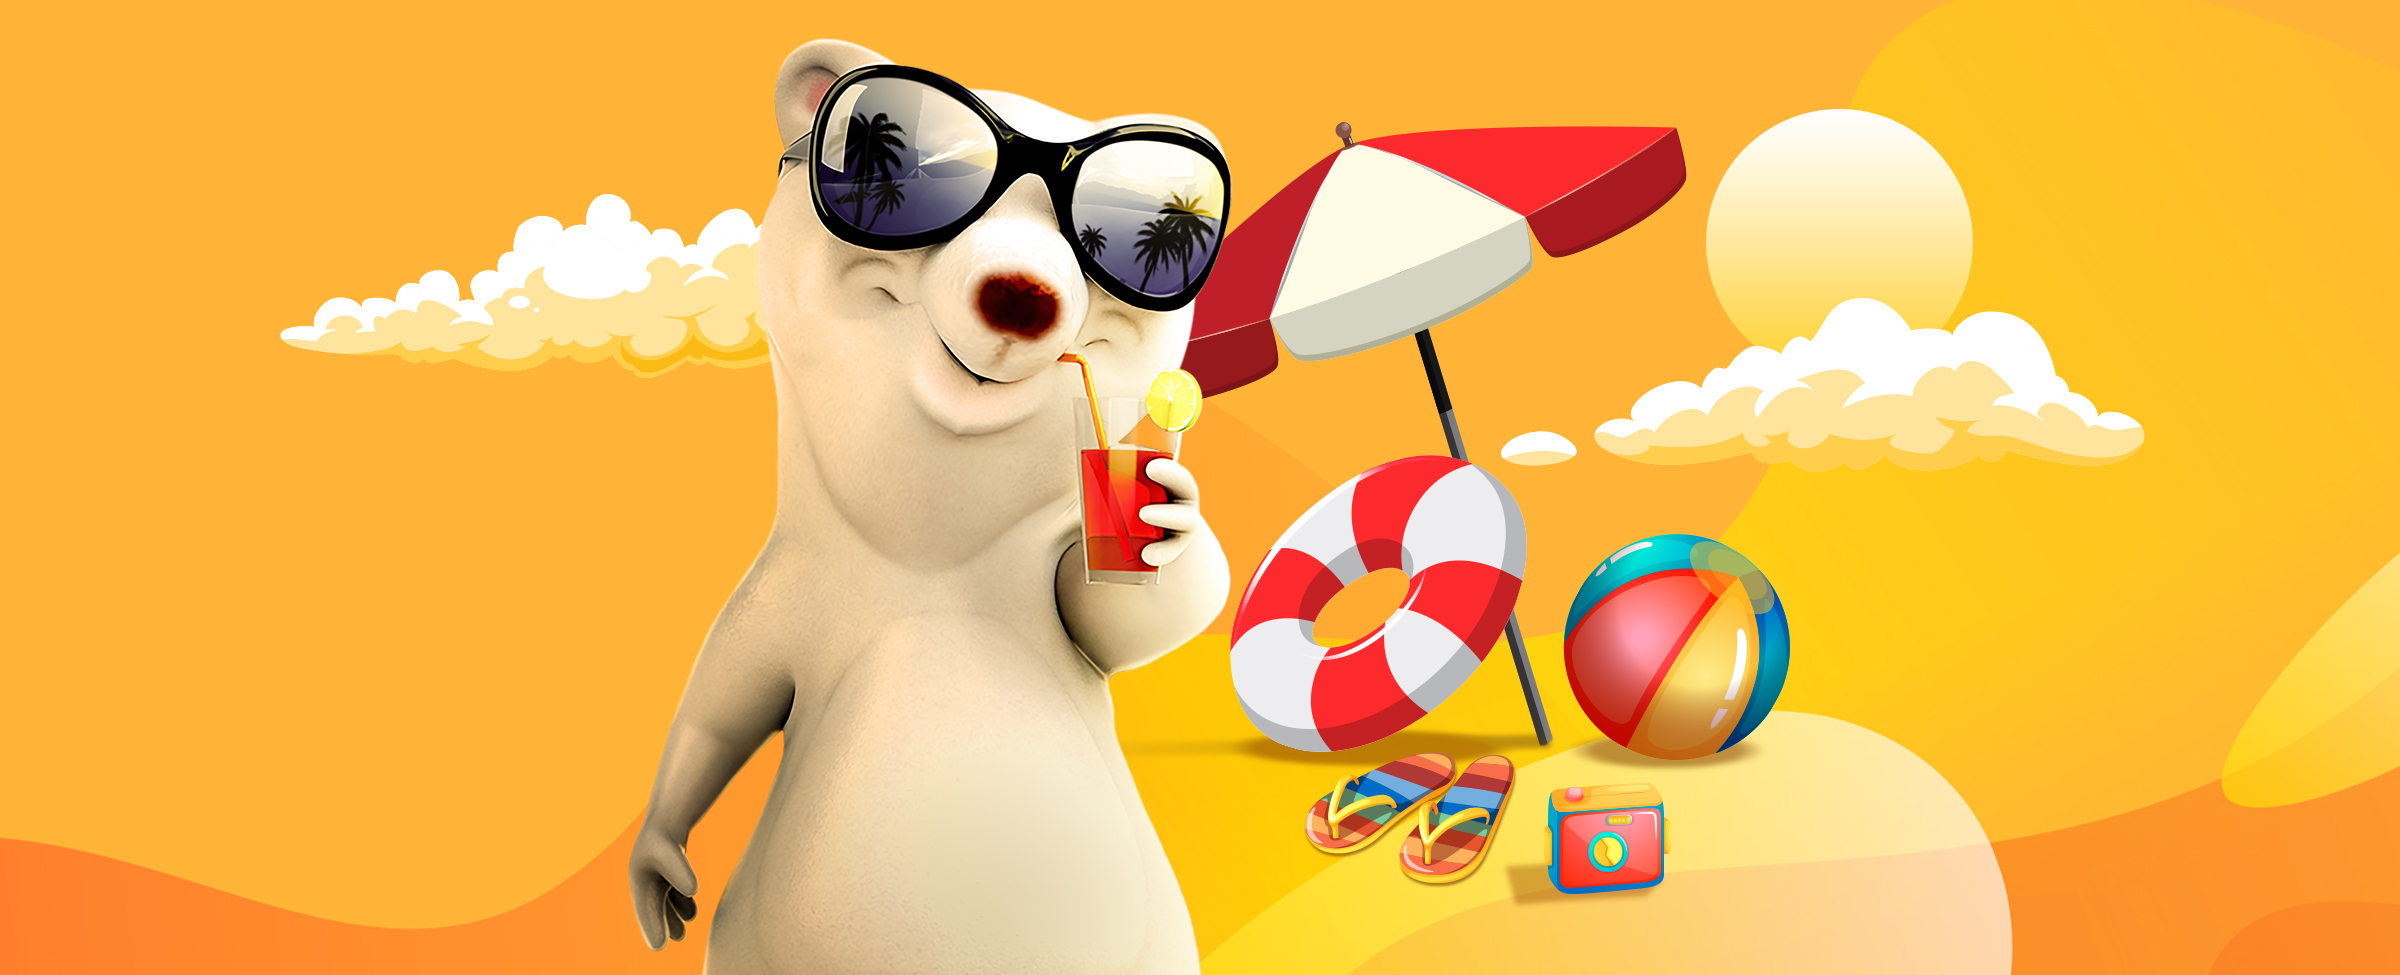 We’re all goin’ on a summer holiday, but where to? Take our summer slots quiz!